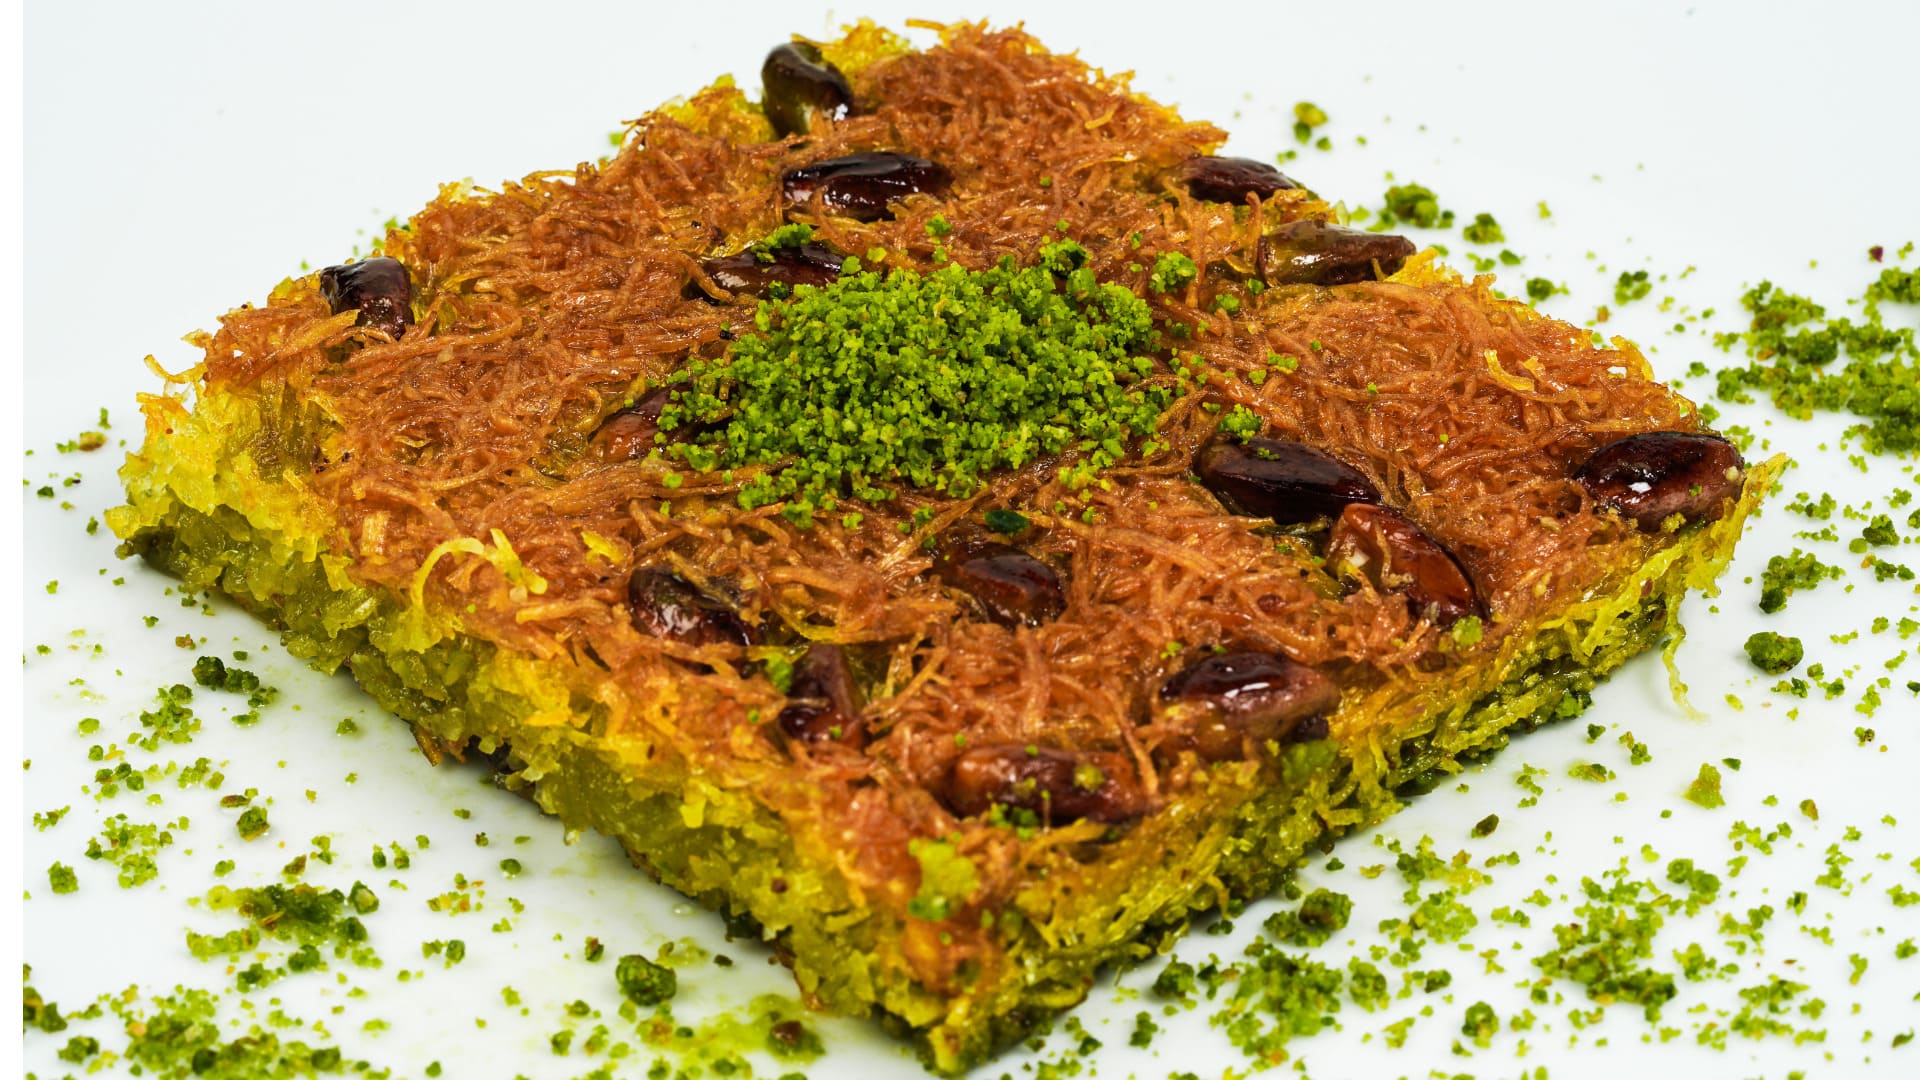 Master the Art of Making Deliciously Sweet Kadayif with this Simple Recipe - A Favorite Dessert in Middle Eastern Cuisine!2